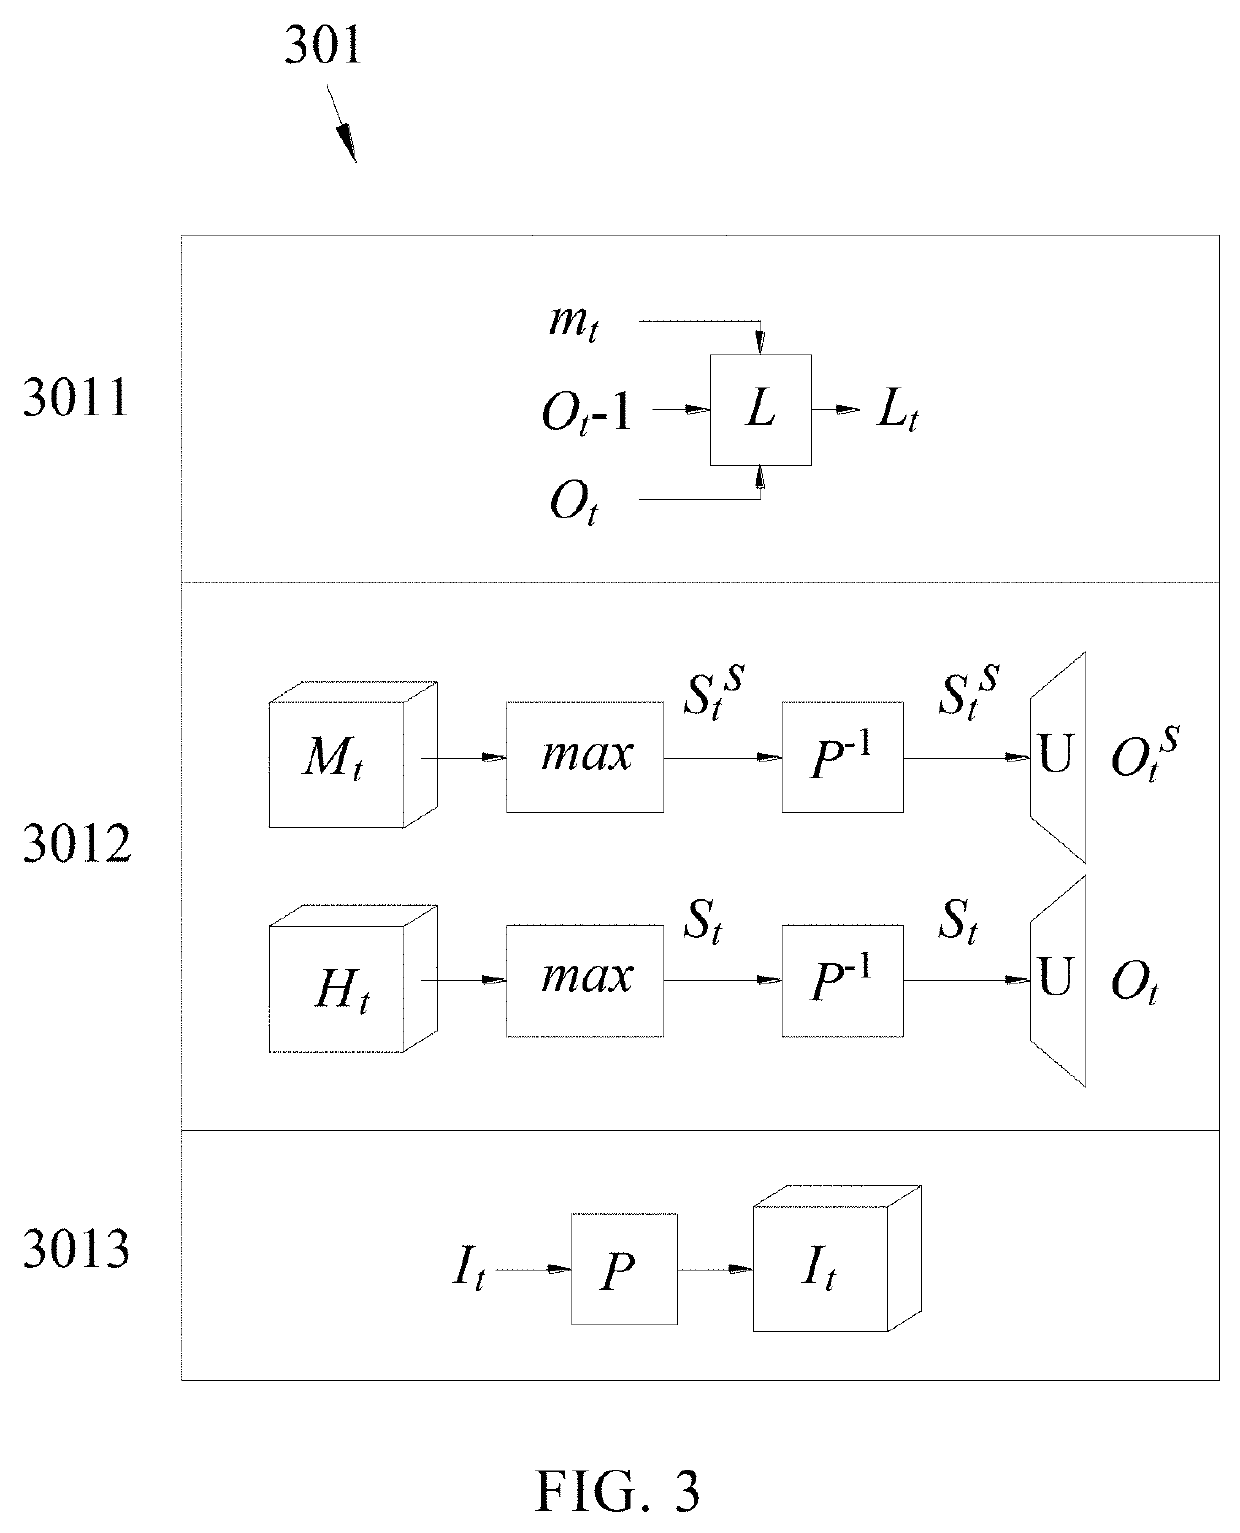 Image feature extraction method and saliency prediction method using the same